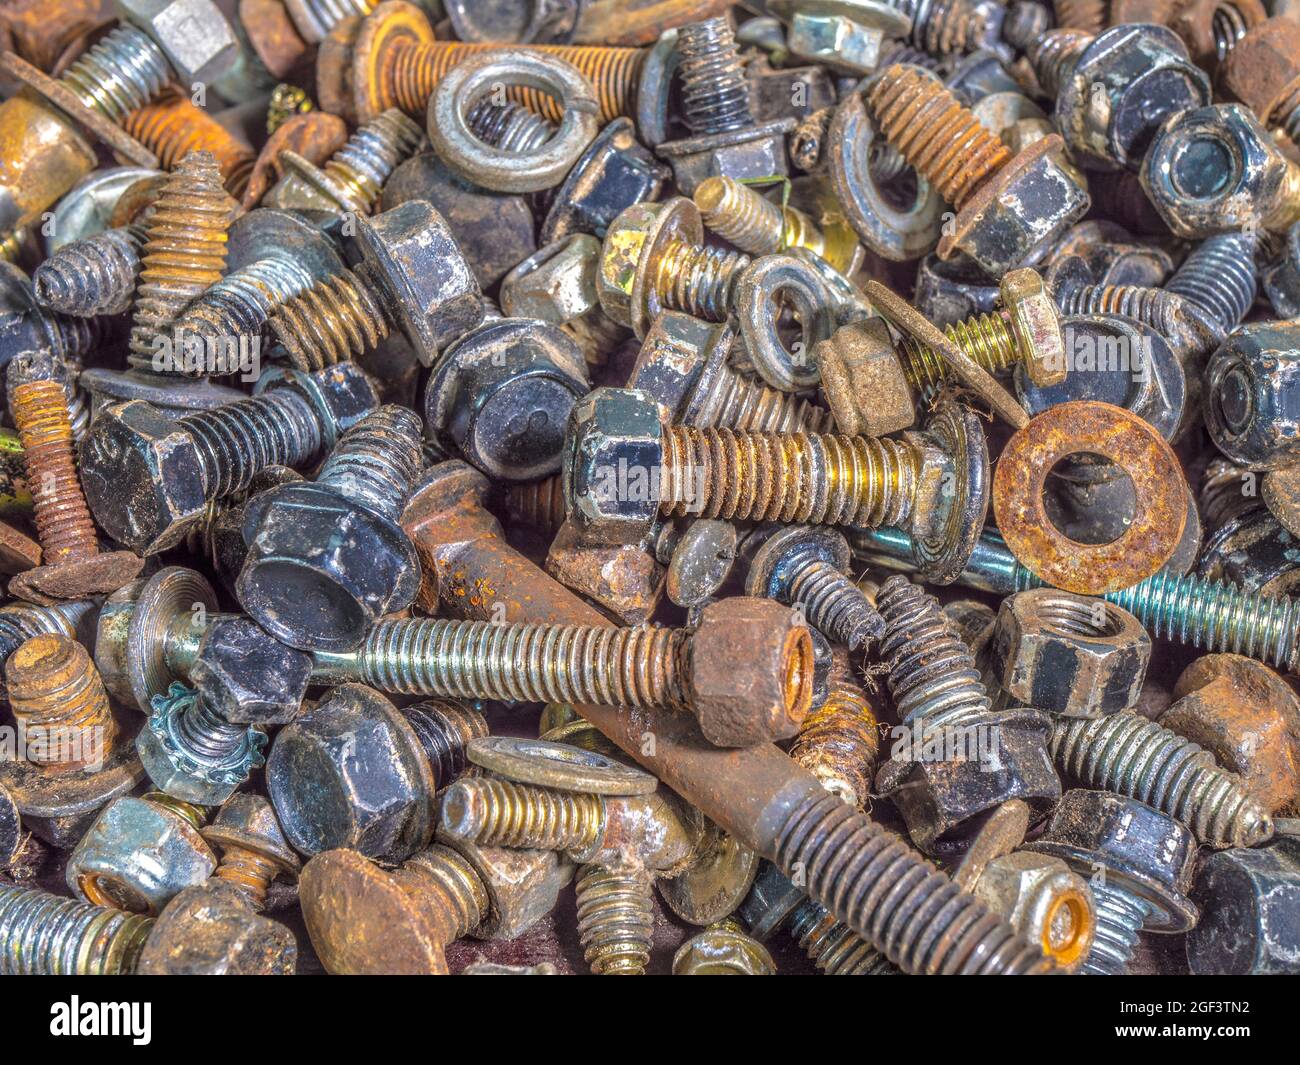 Closeup POV overhead shot of a random assortment of used metal bolts, washers and nuts. Stock Photo